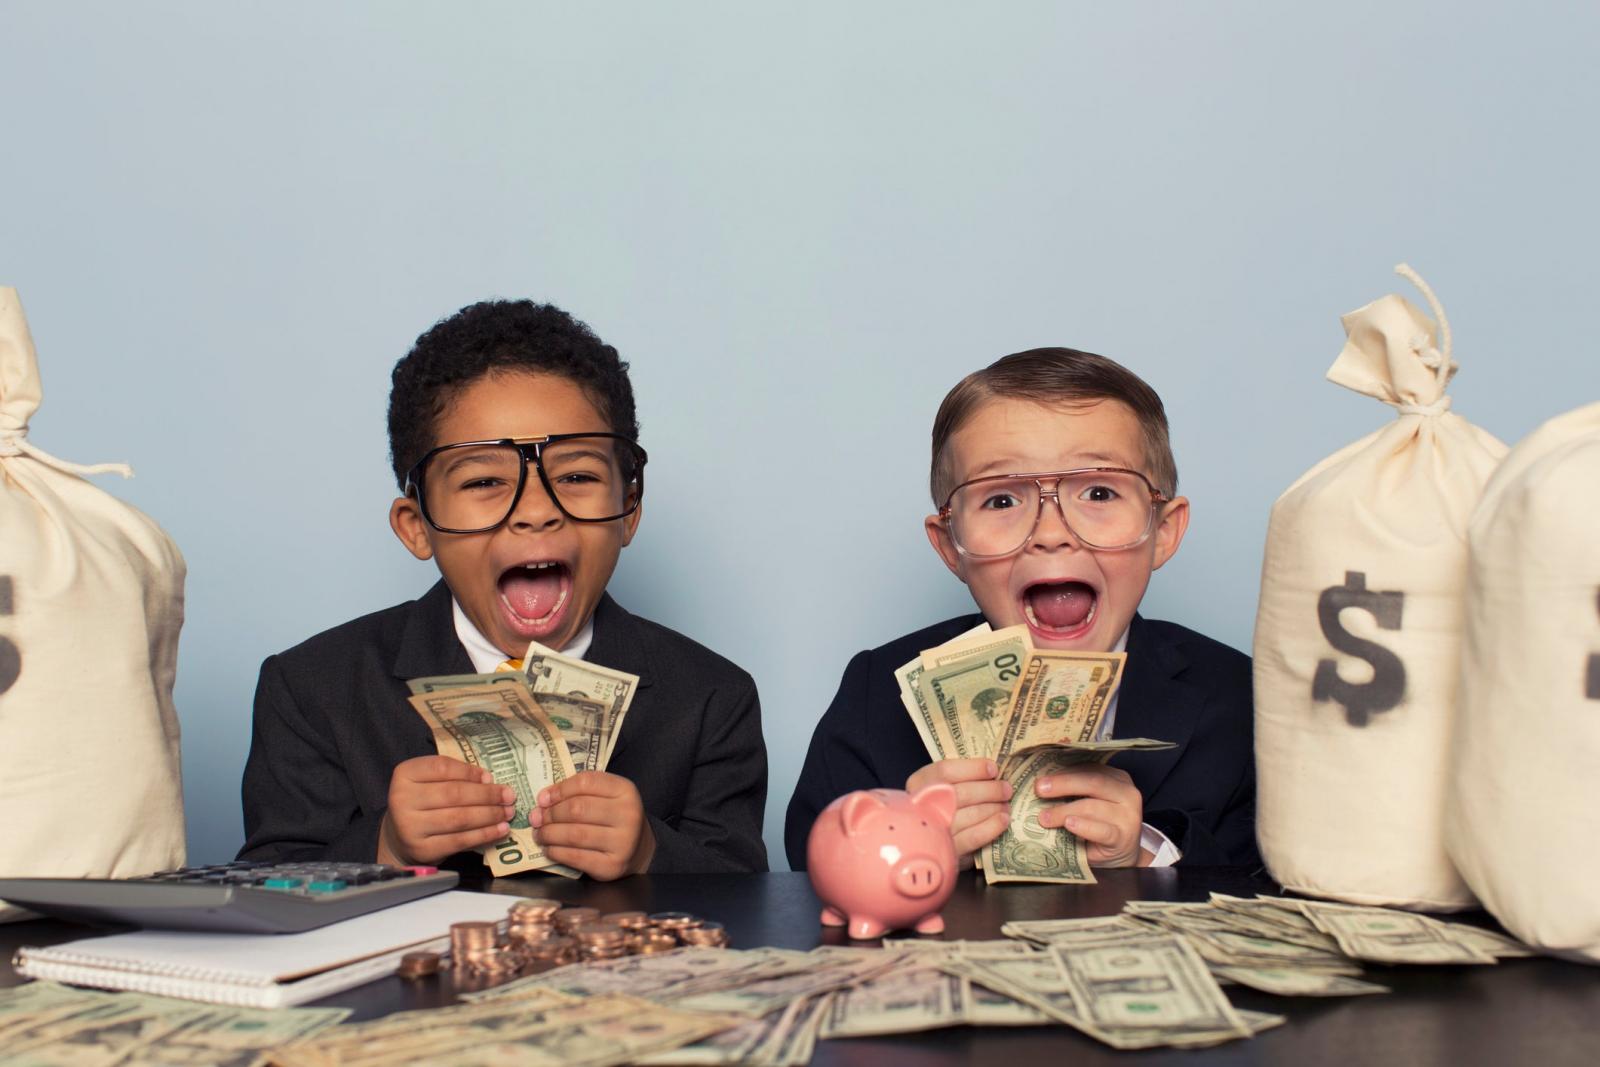 One of These Words Is Not Like the Others — Can You Spot the Odd One Out? Kids Money Rich Cash Dollars